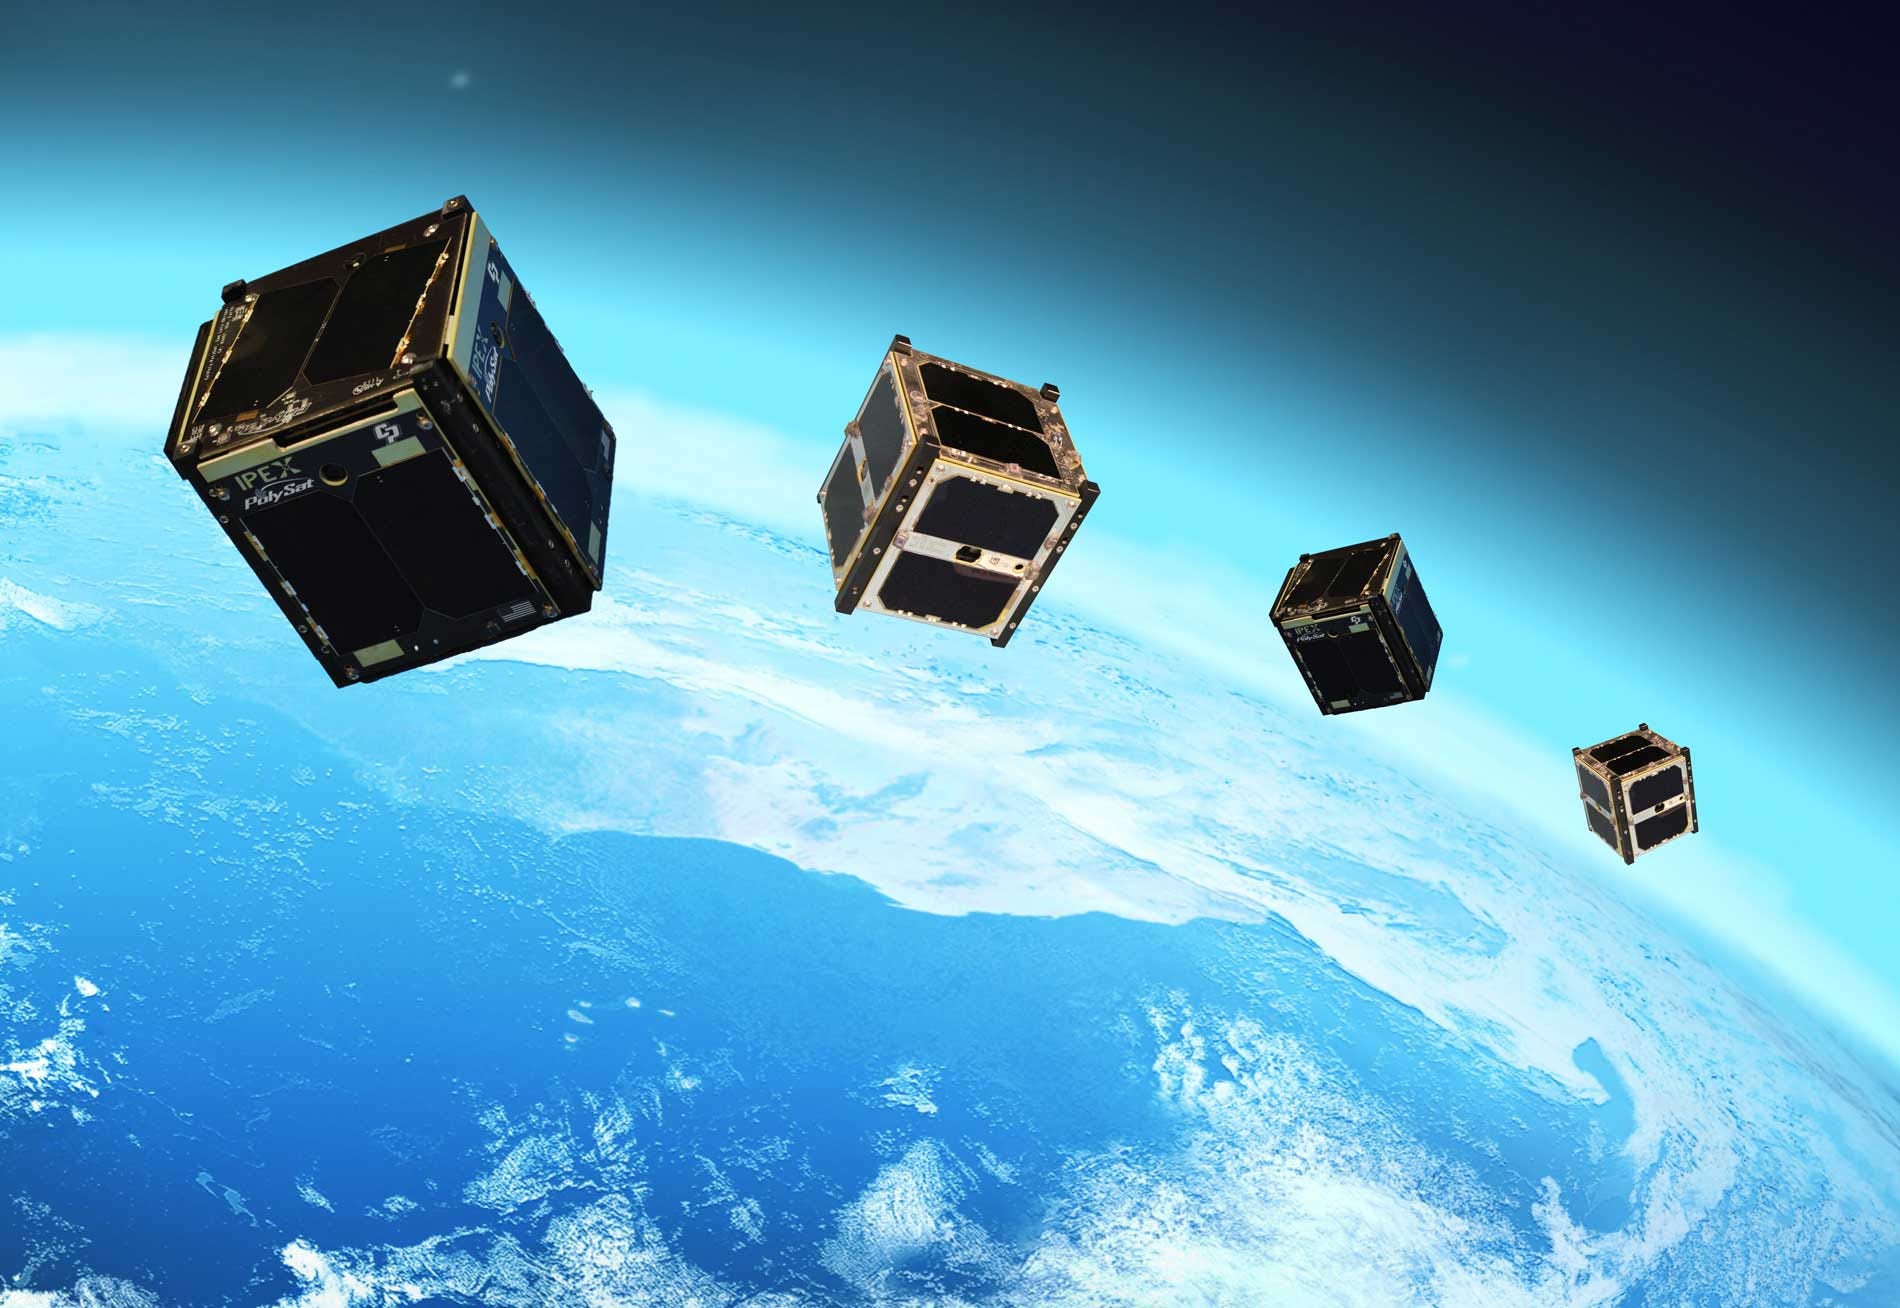 Building a Cube Satellite: A Step-by-Step Guide